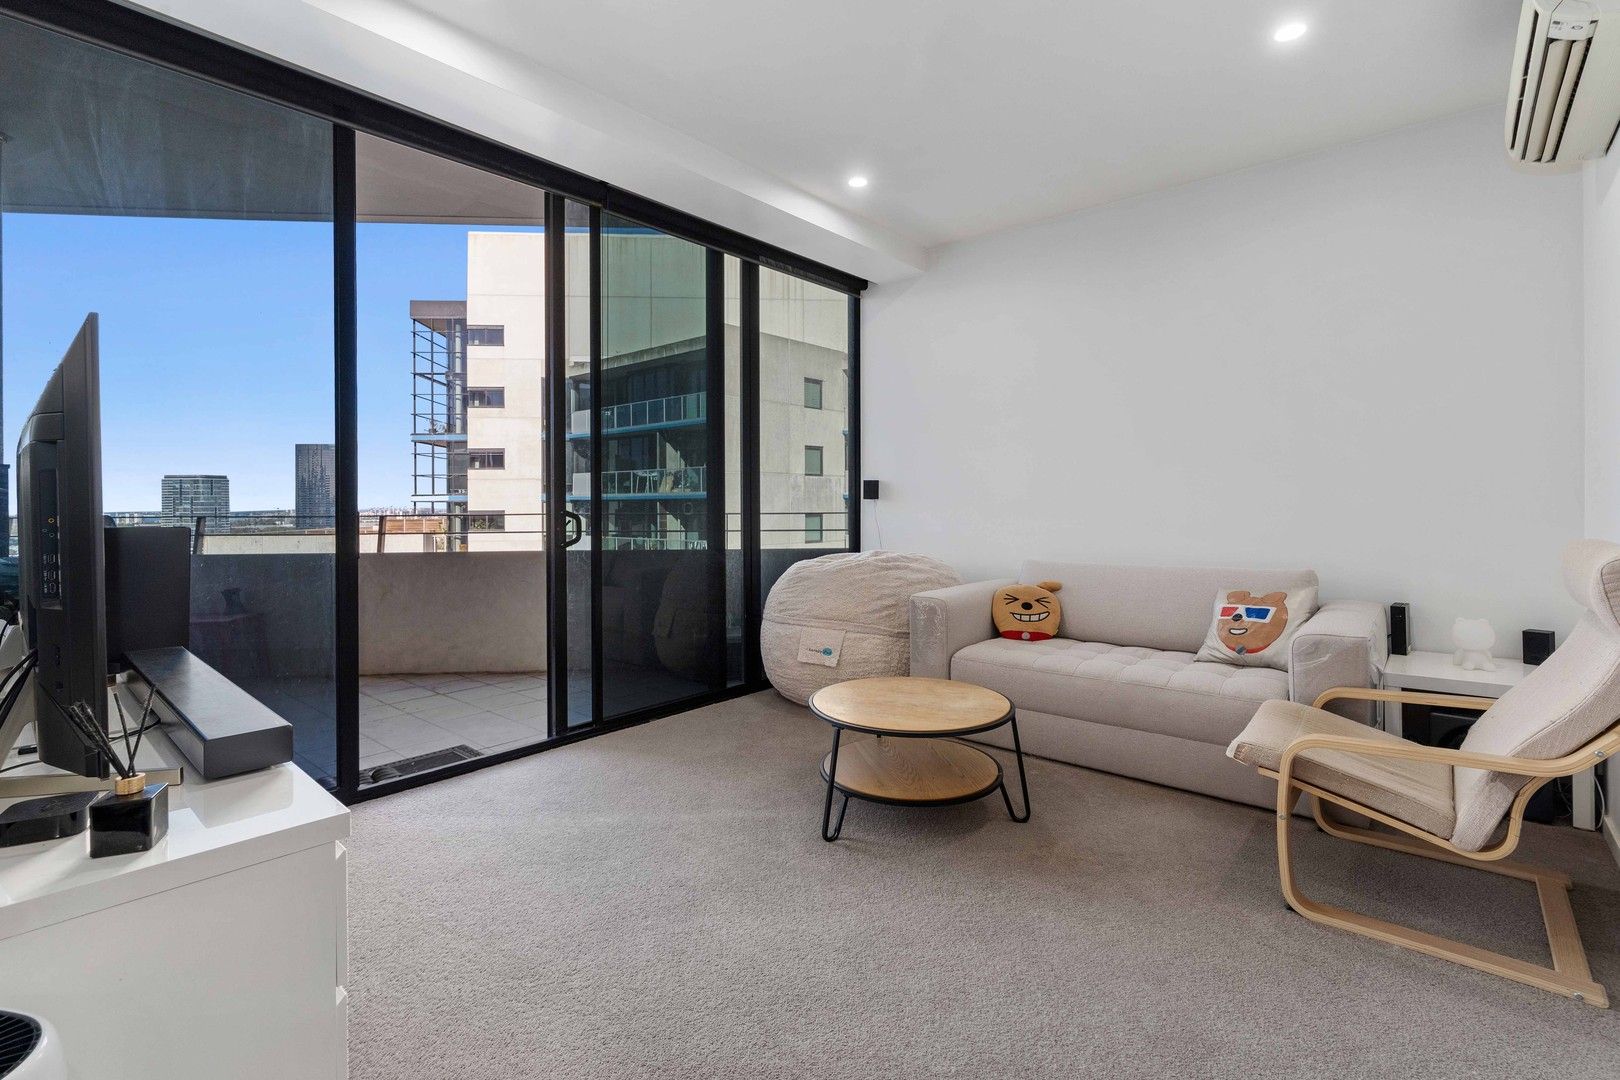 2 bedrooms House in 2006/15 Caravel Lane DOCKLANDS VIC, 3008